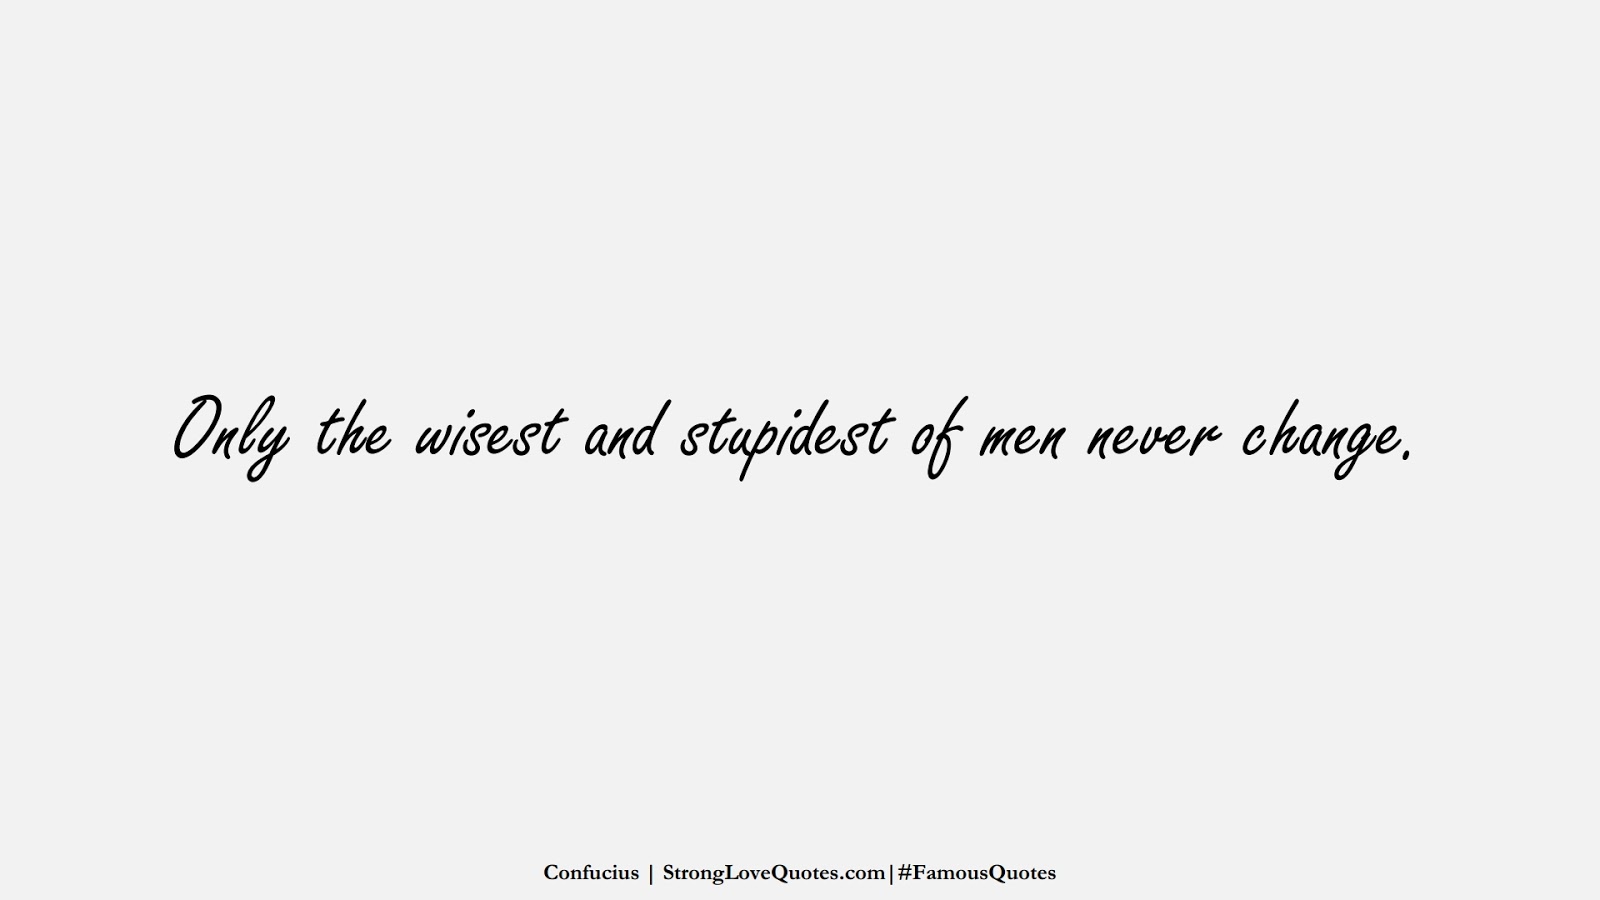 Only the wisest and stupidest of men never change. (Confucius);  #FamousQuotes